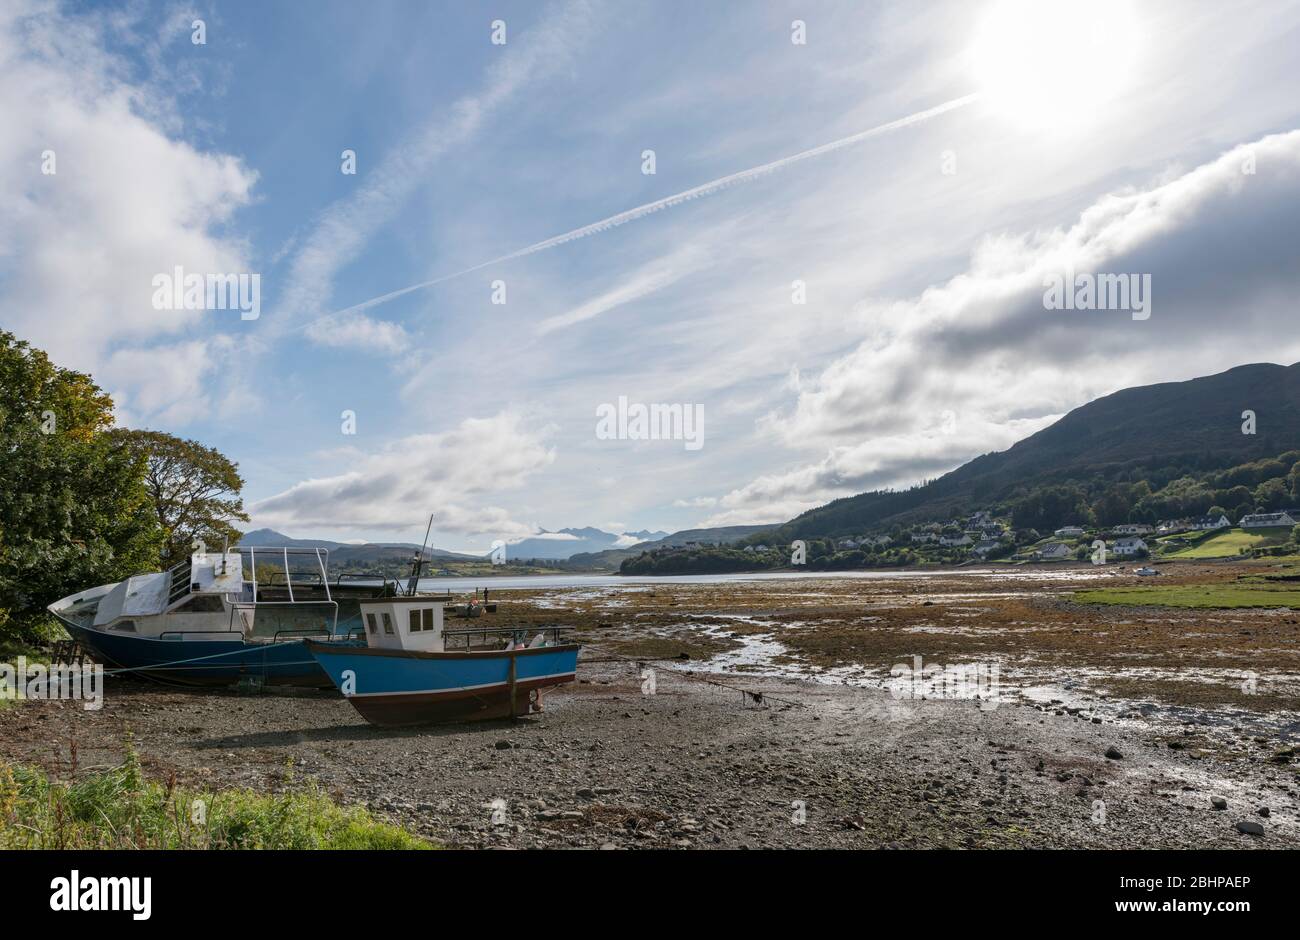 The Bay of Lovely Muck in the town of Portree on the Isle of Skye in Scotland Stock Photo